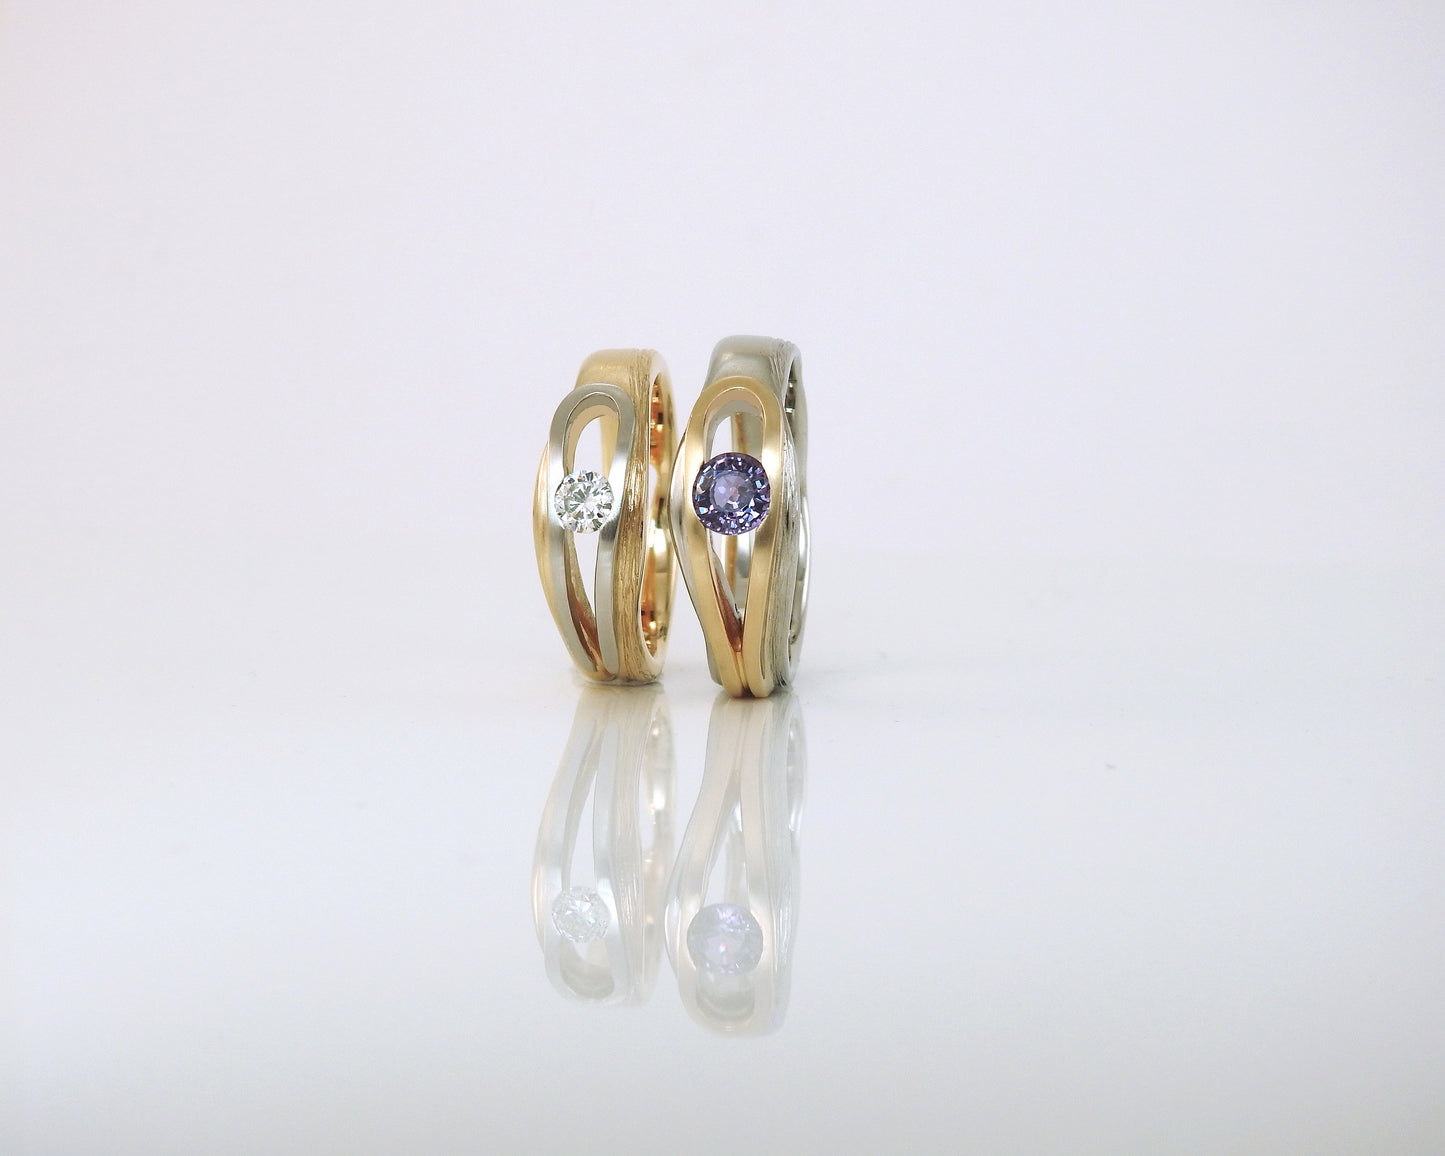 Custom two tone, yellow and white gold rings with diamond and sapphire by ZEALmetal, Nicole Horlor, in Kingston ON Canada